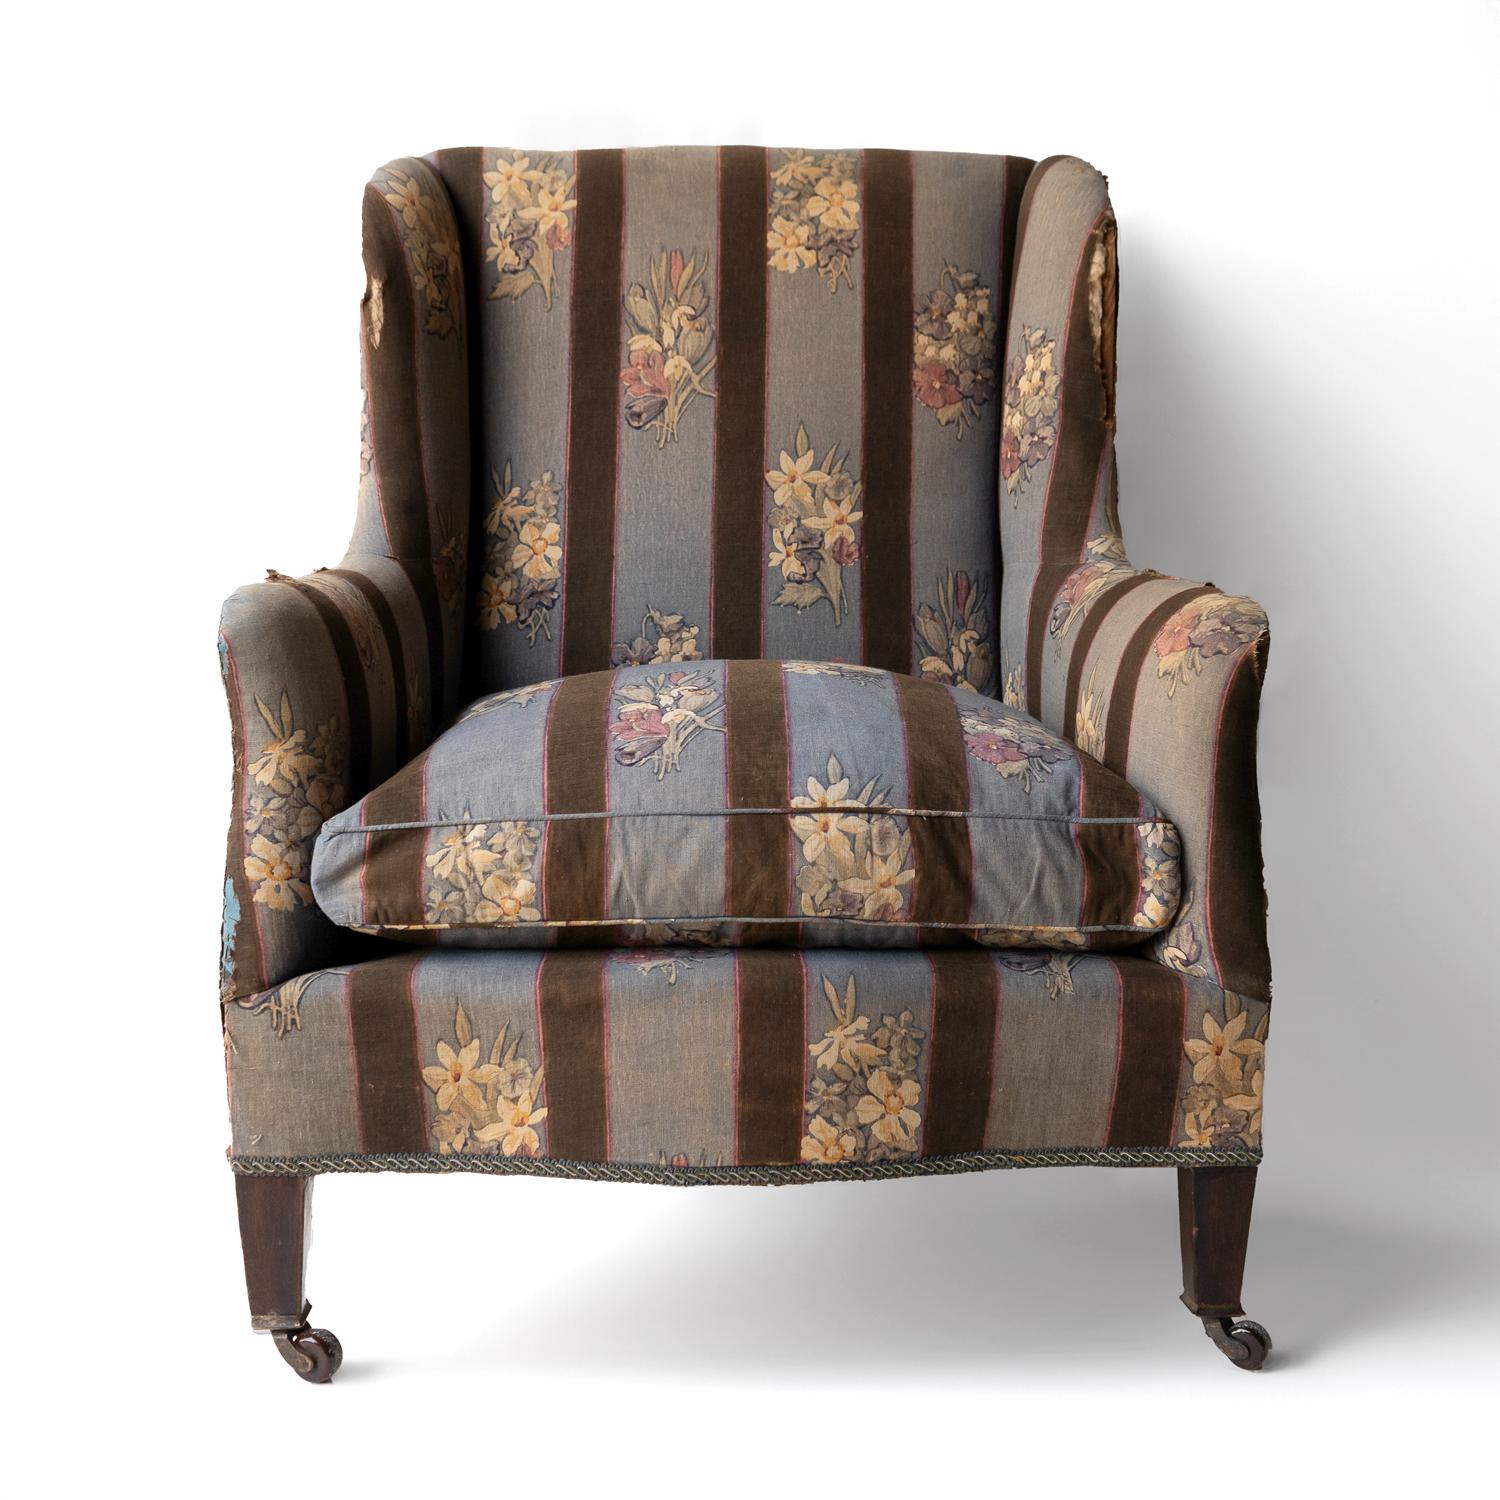 ANTIQUE UPHOLSTERED CHAIR 
A good quality country house chair of fairly squat proportions currently in its original and wonderful stripy blue floral fabric with depictions of crocuses, daffodils and snowdrops.

Standing on tapered wooden legs with